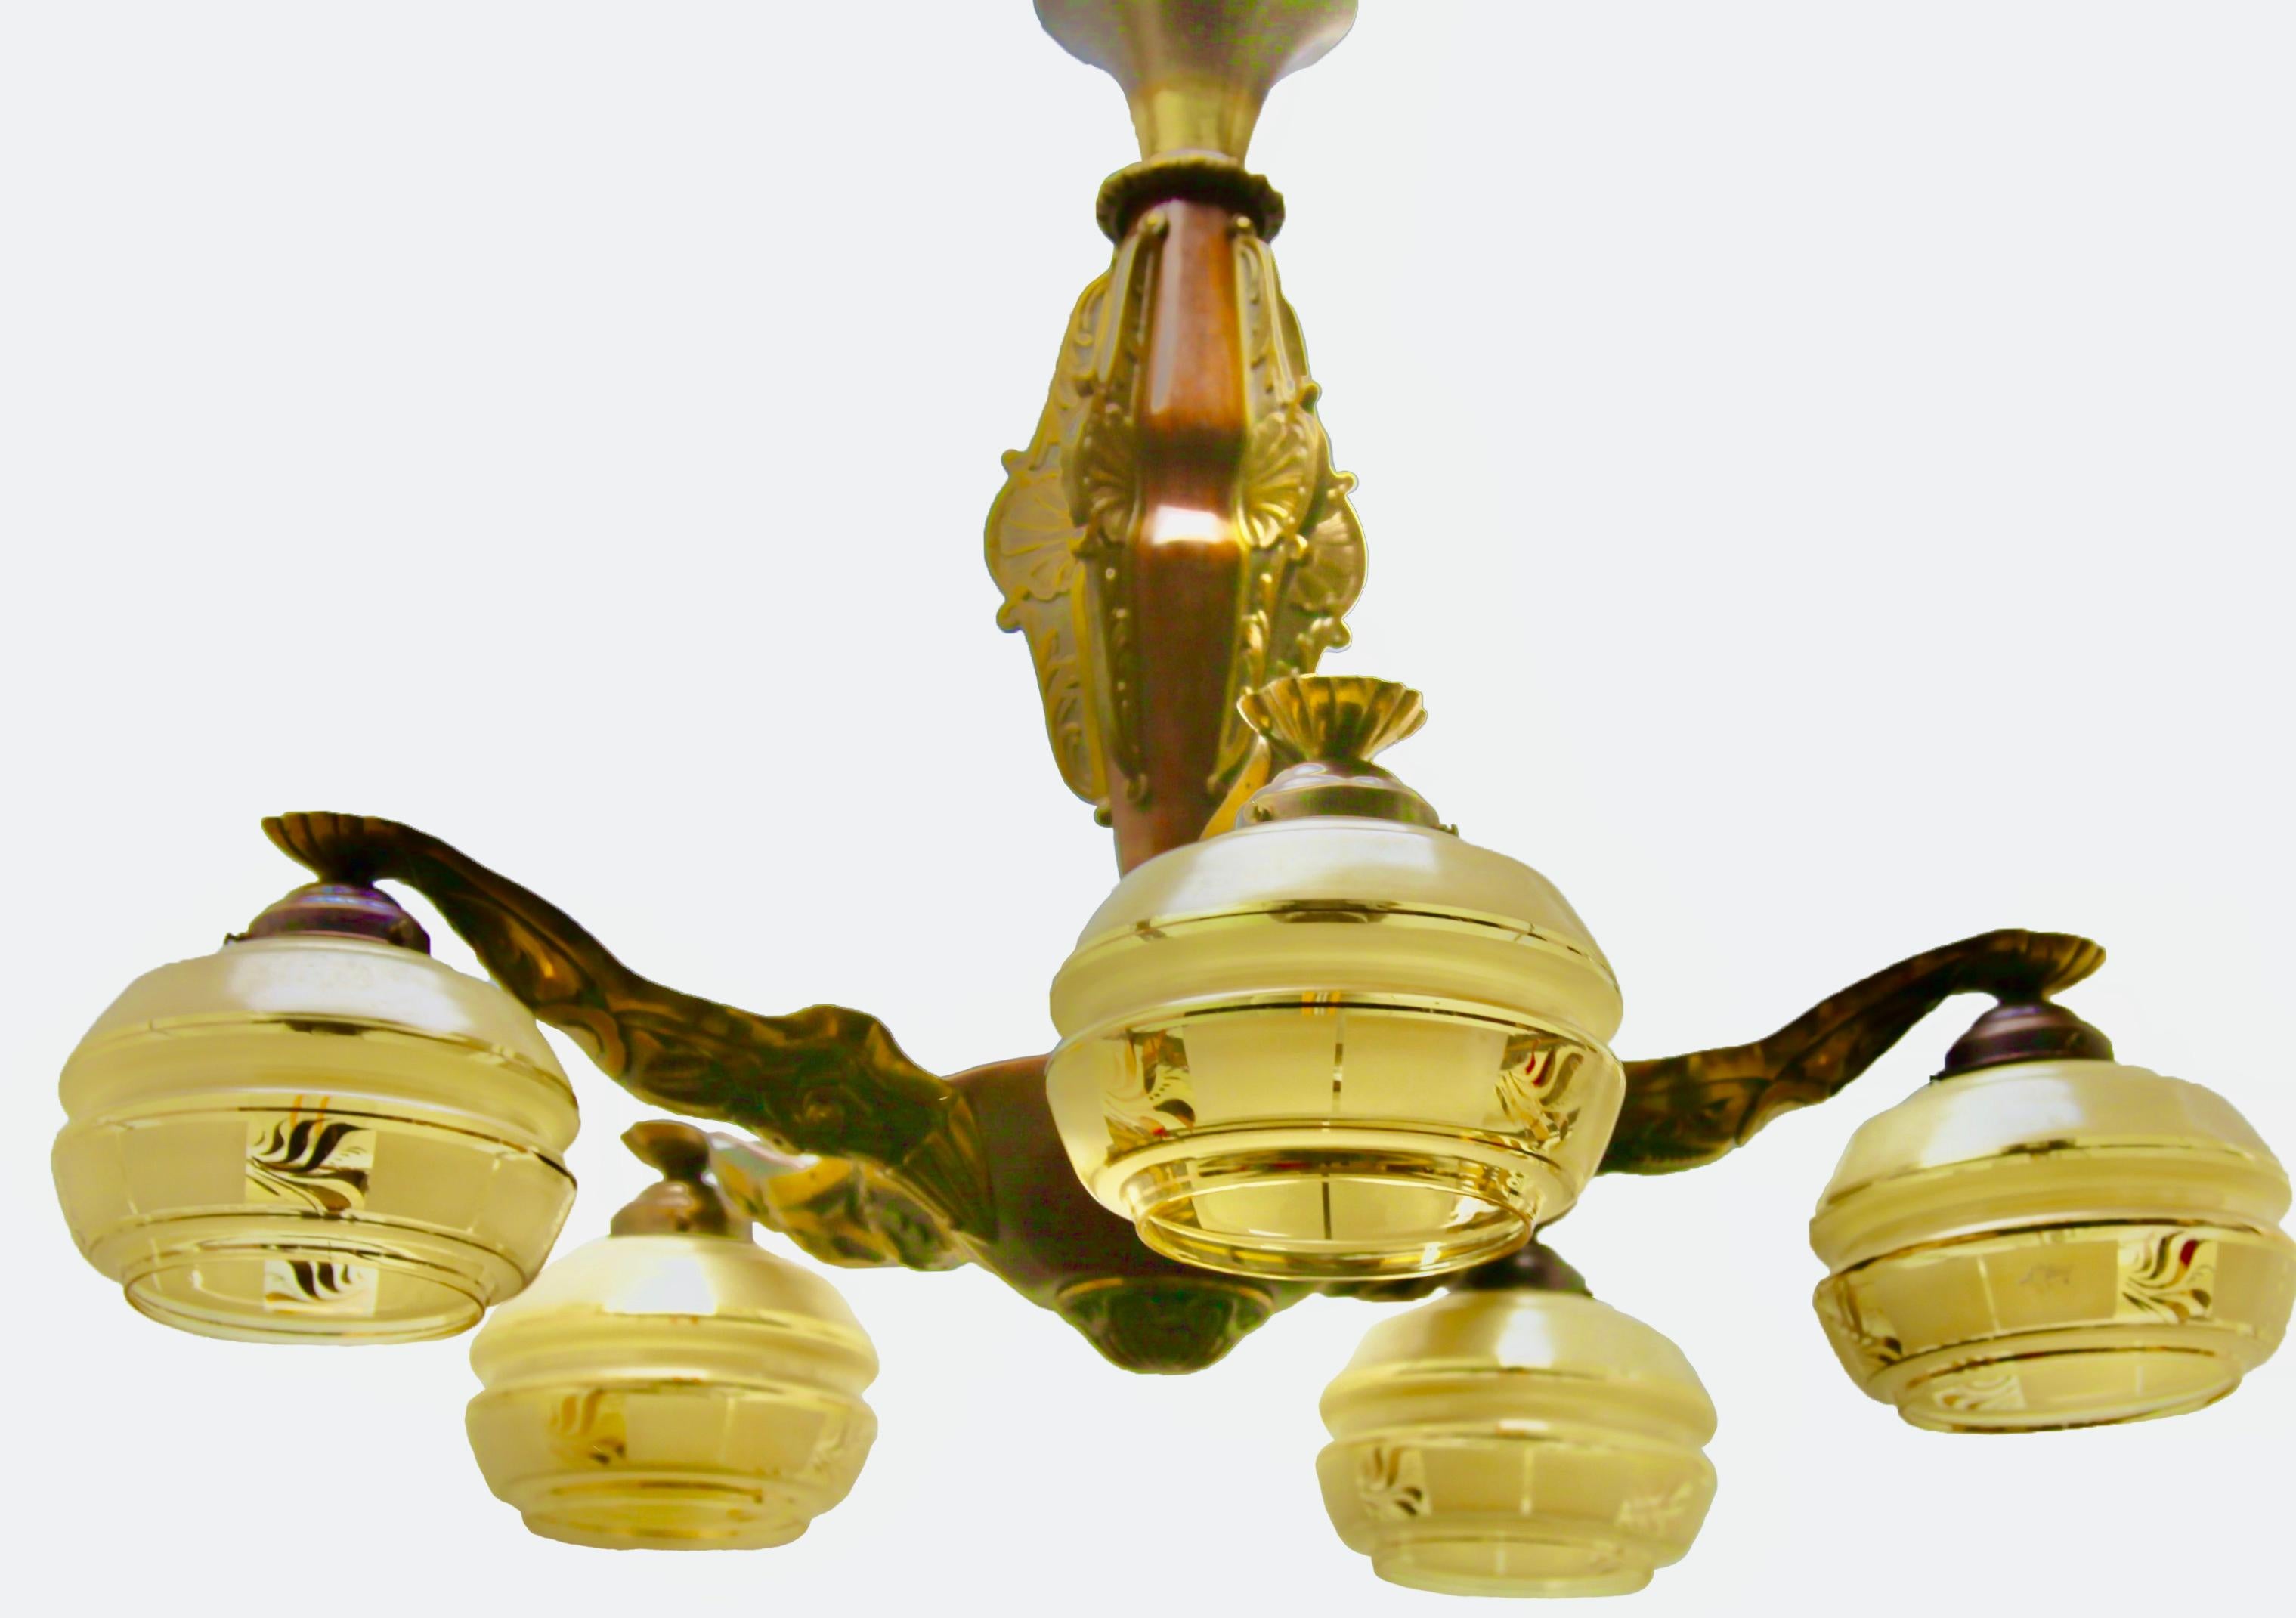 Mid-20th Century Art Deco Solid Brass and Wooden Details Chandelier Shades Whit Gold Pattern For Sale